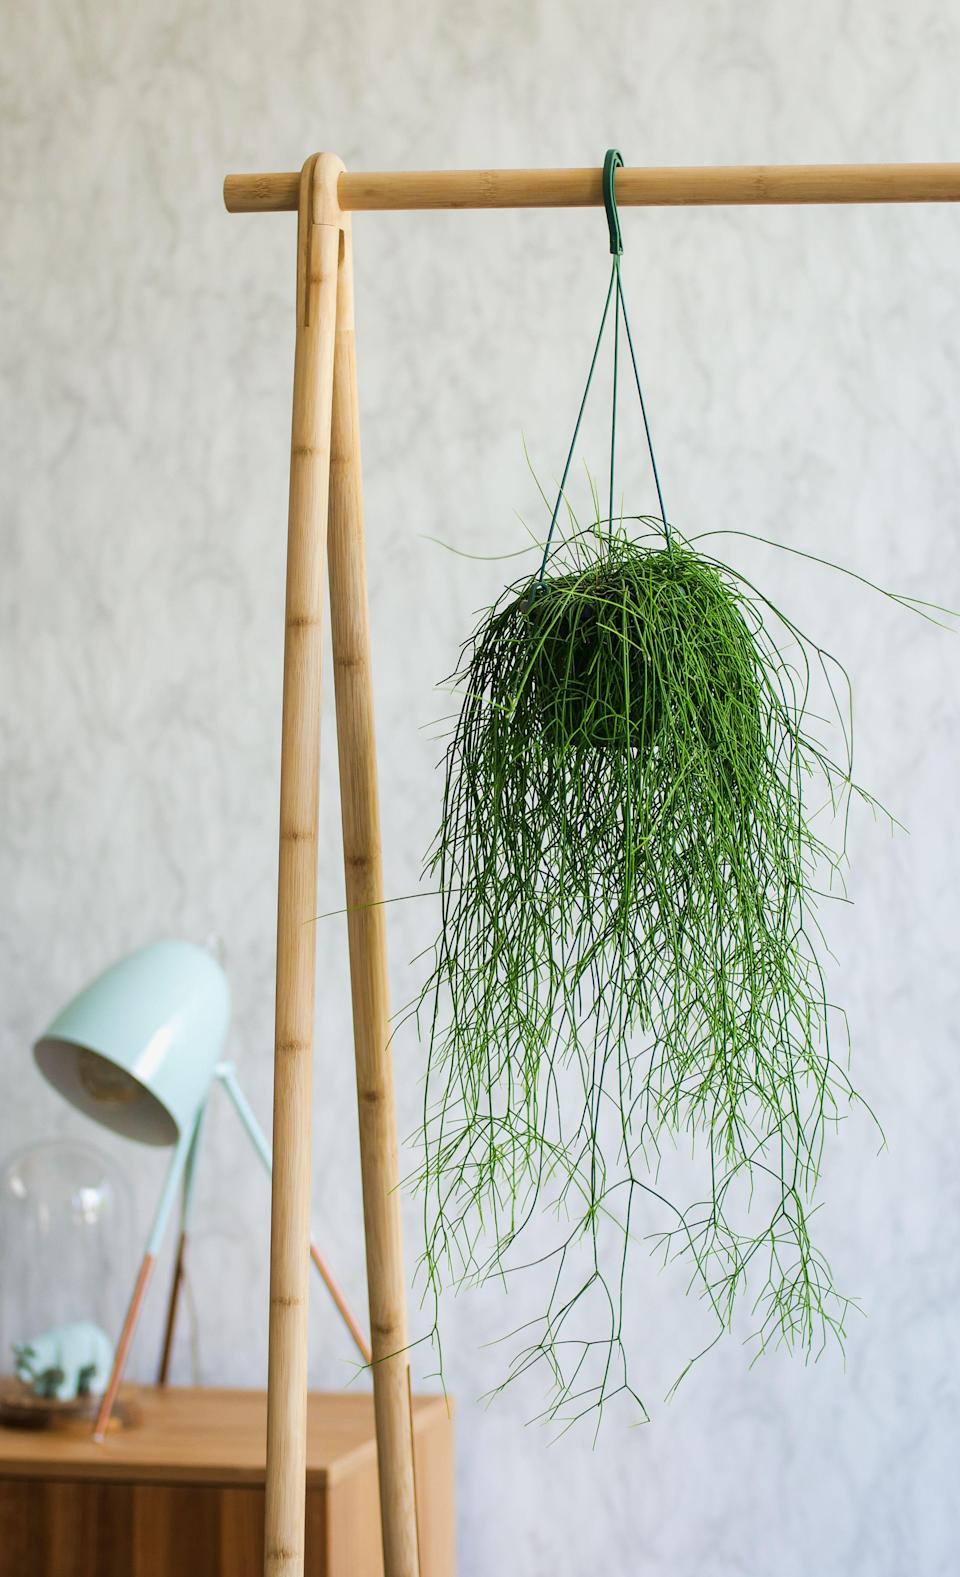 If you have a tight house, don't worry because there are 6 types of hanging plants for you to choose from - Photo 12.